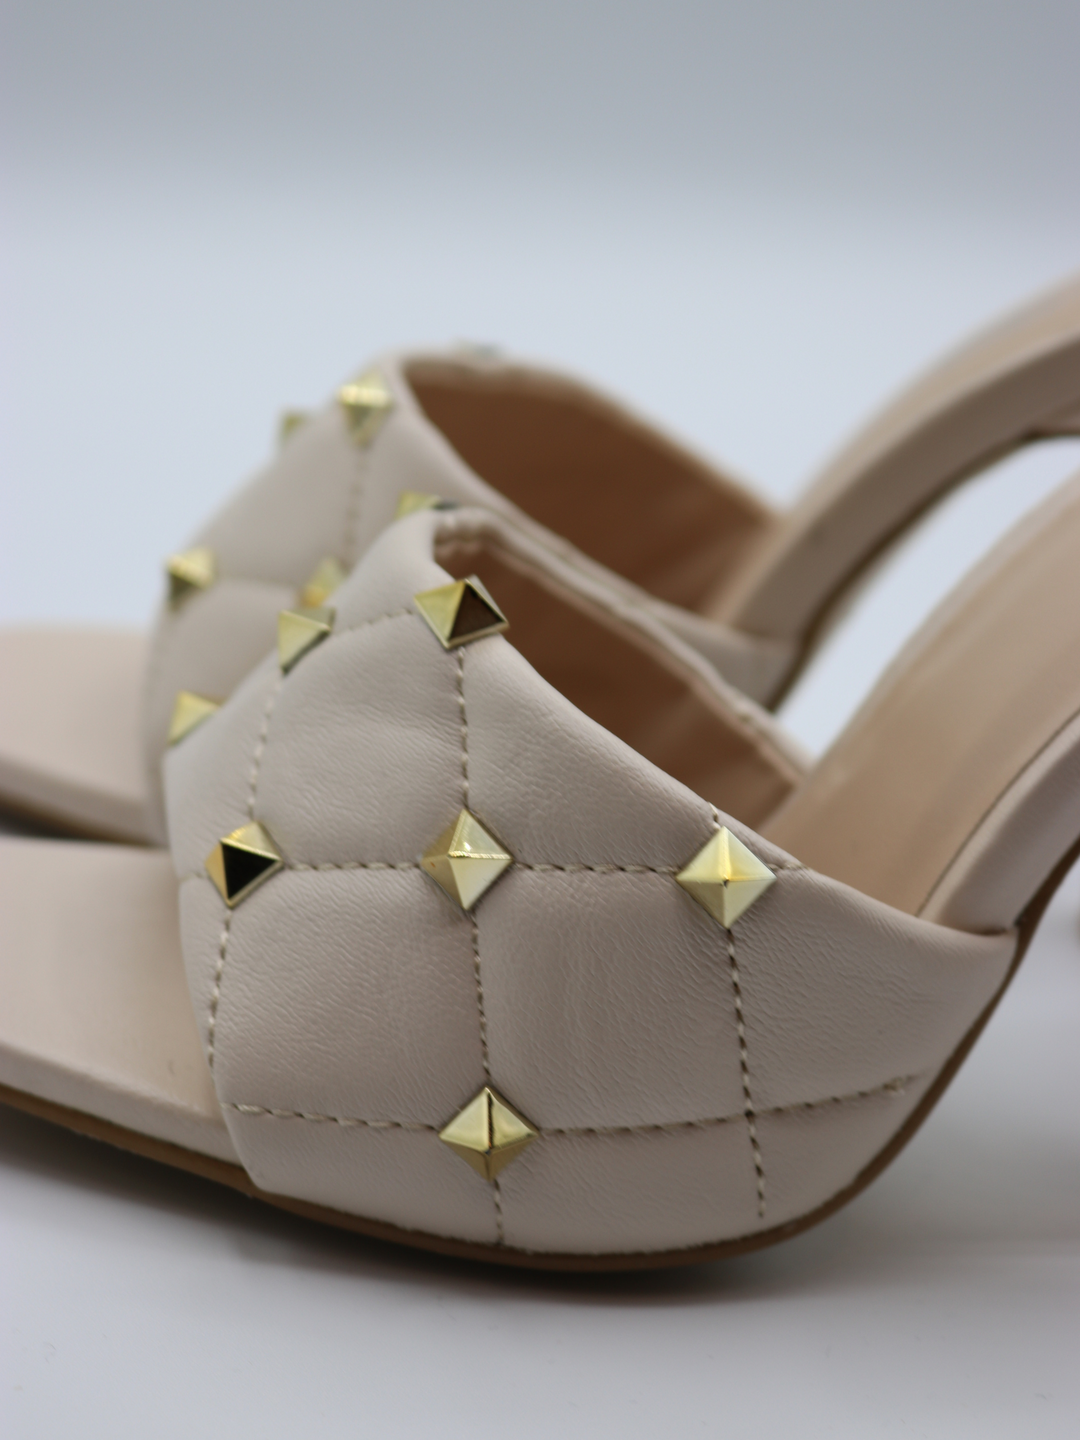 Cream quilted faux leather mule heels with gold studded heels. A closeup of both studded shoes can be seen. 